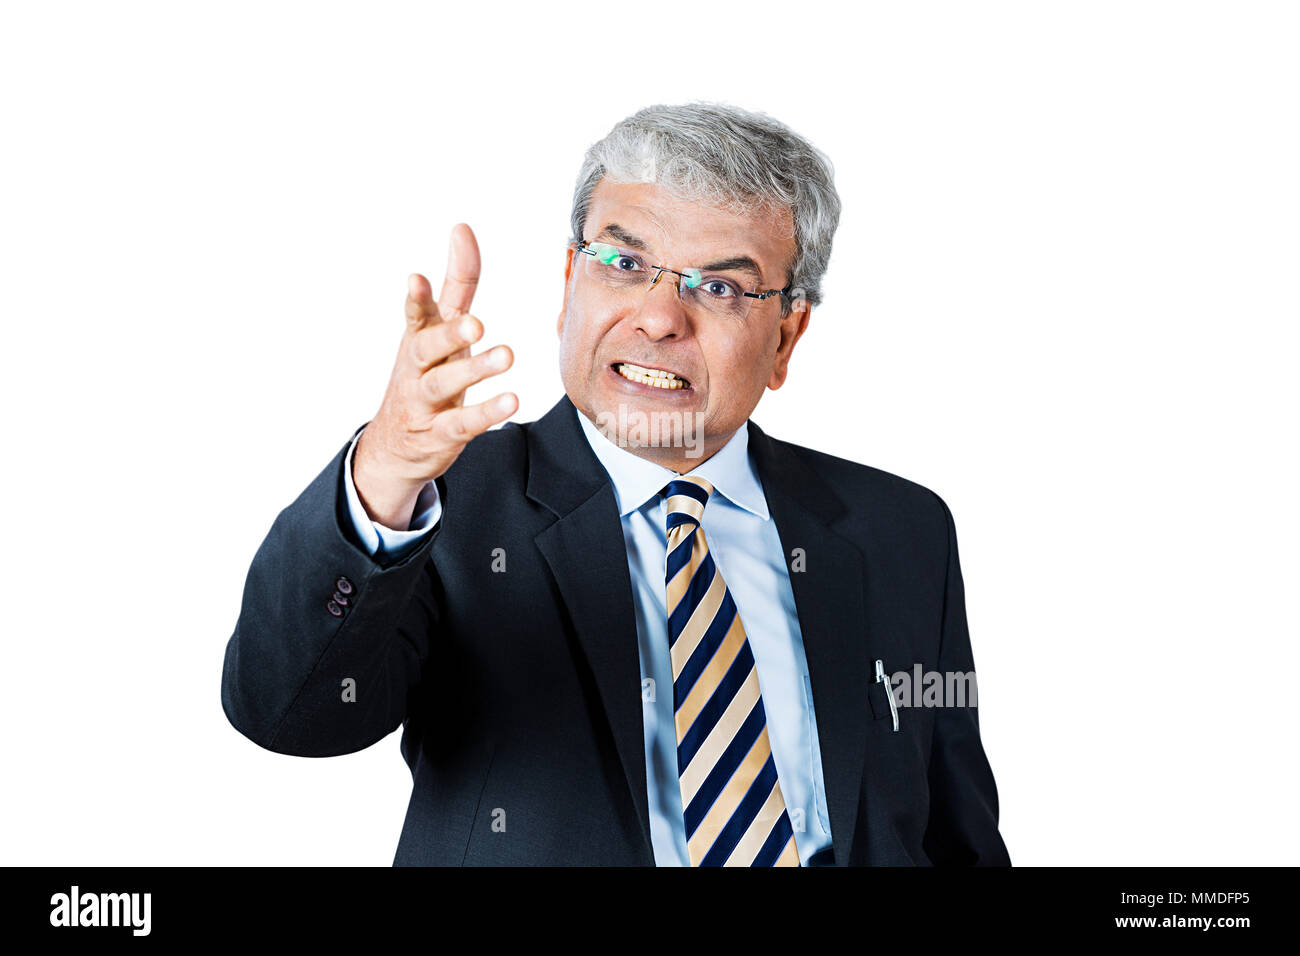 Angry One Business man Boss Gestur Hand Blaming Frustration Warning Stock Photo